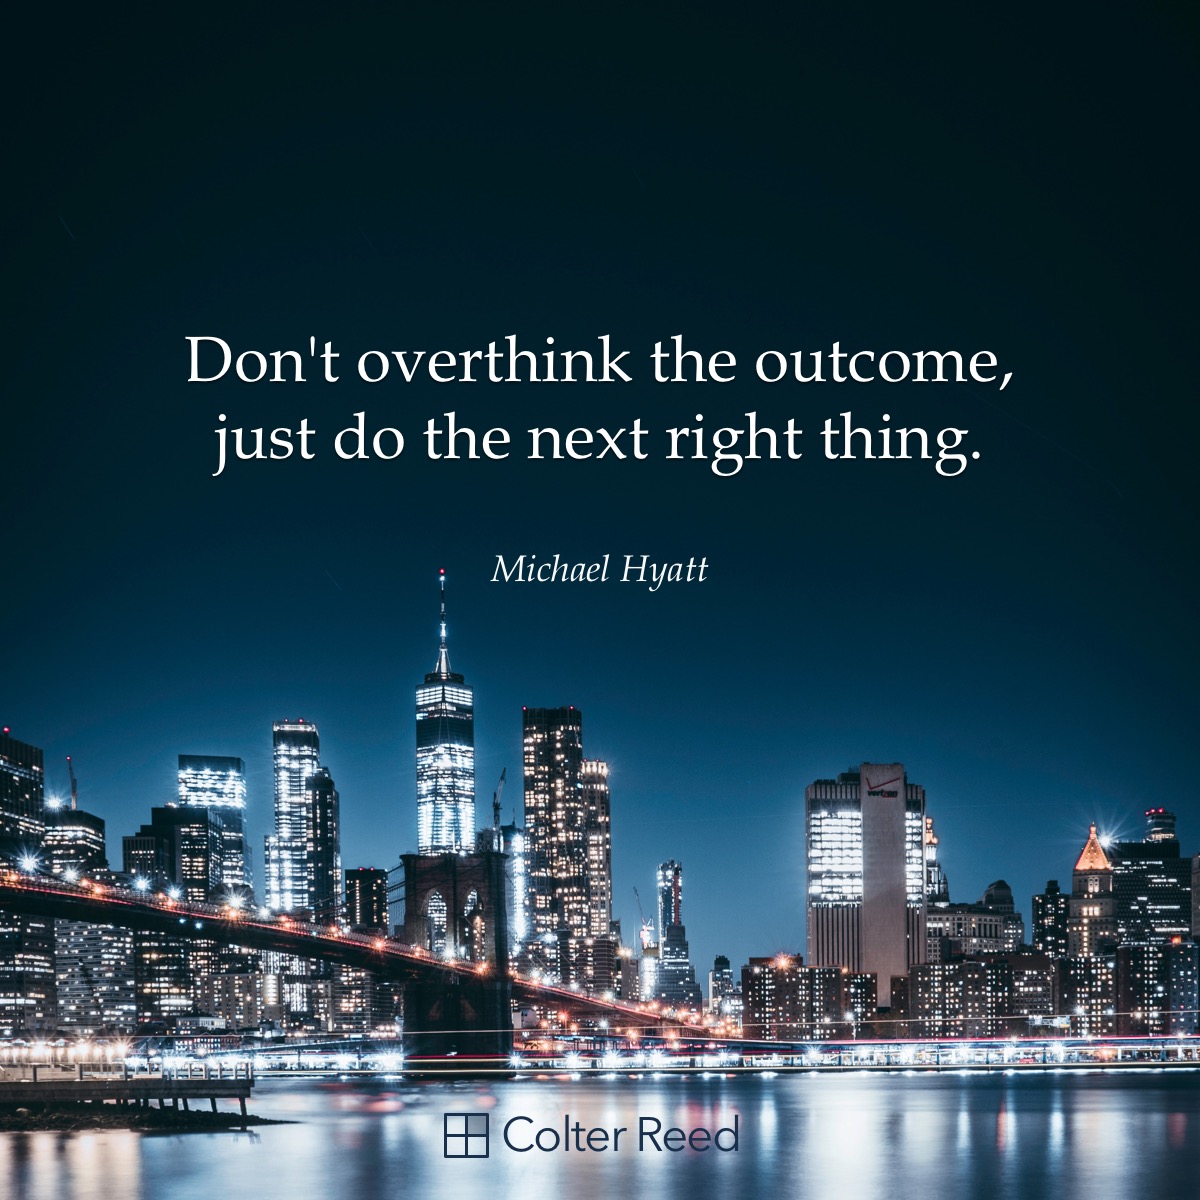 Don’t overthink the outcome, just do the next right thing. —Michael Hyatt